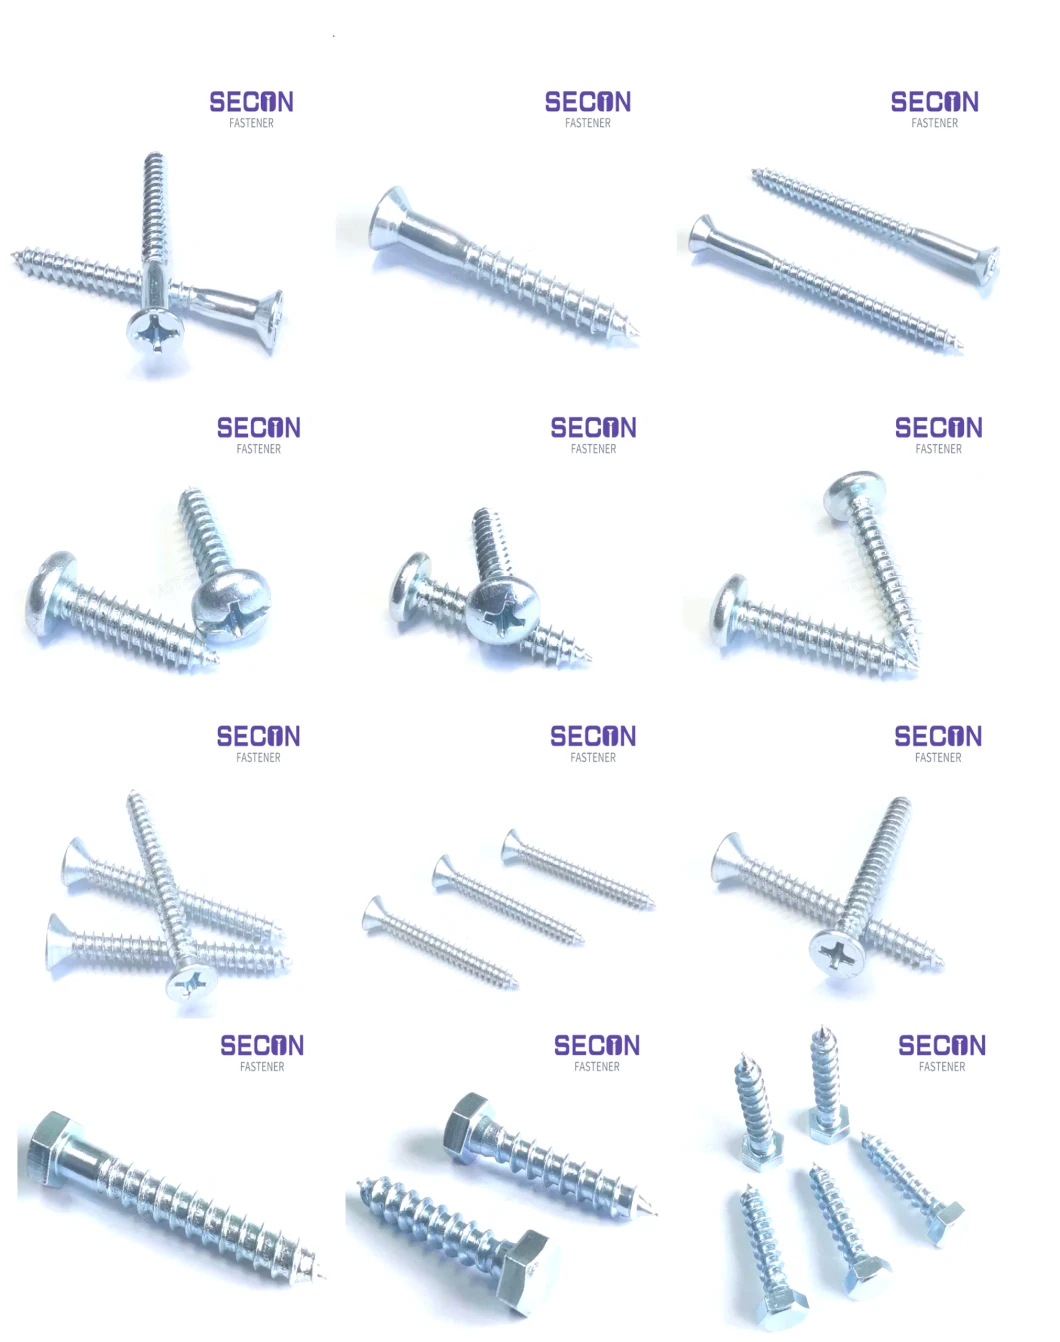 China Factory Supply DIN571 Wood Screw Drywall Screw/ Self Tapping Screw/Self Drilling Screw/Chipboard Screw/Wood Screw/Roofing Screw/Machine Screw/Tornillo/